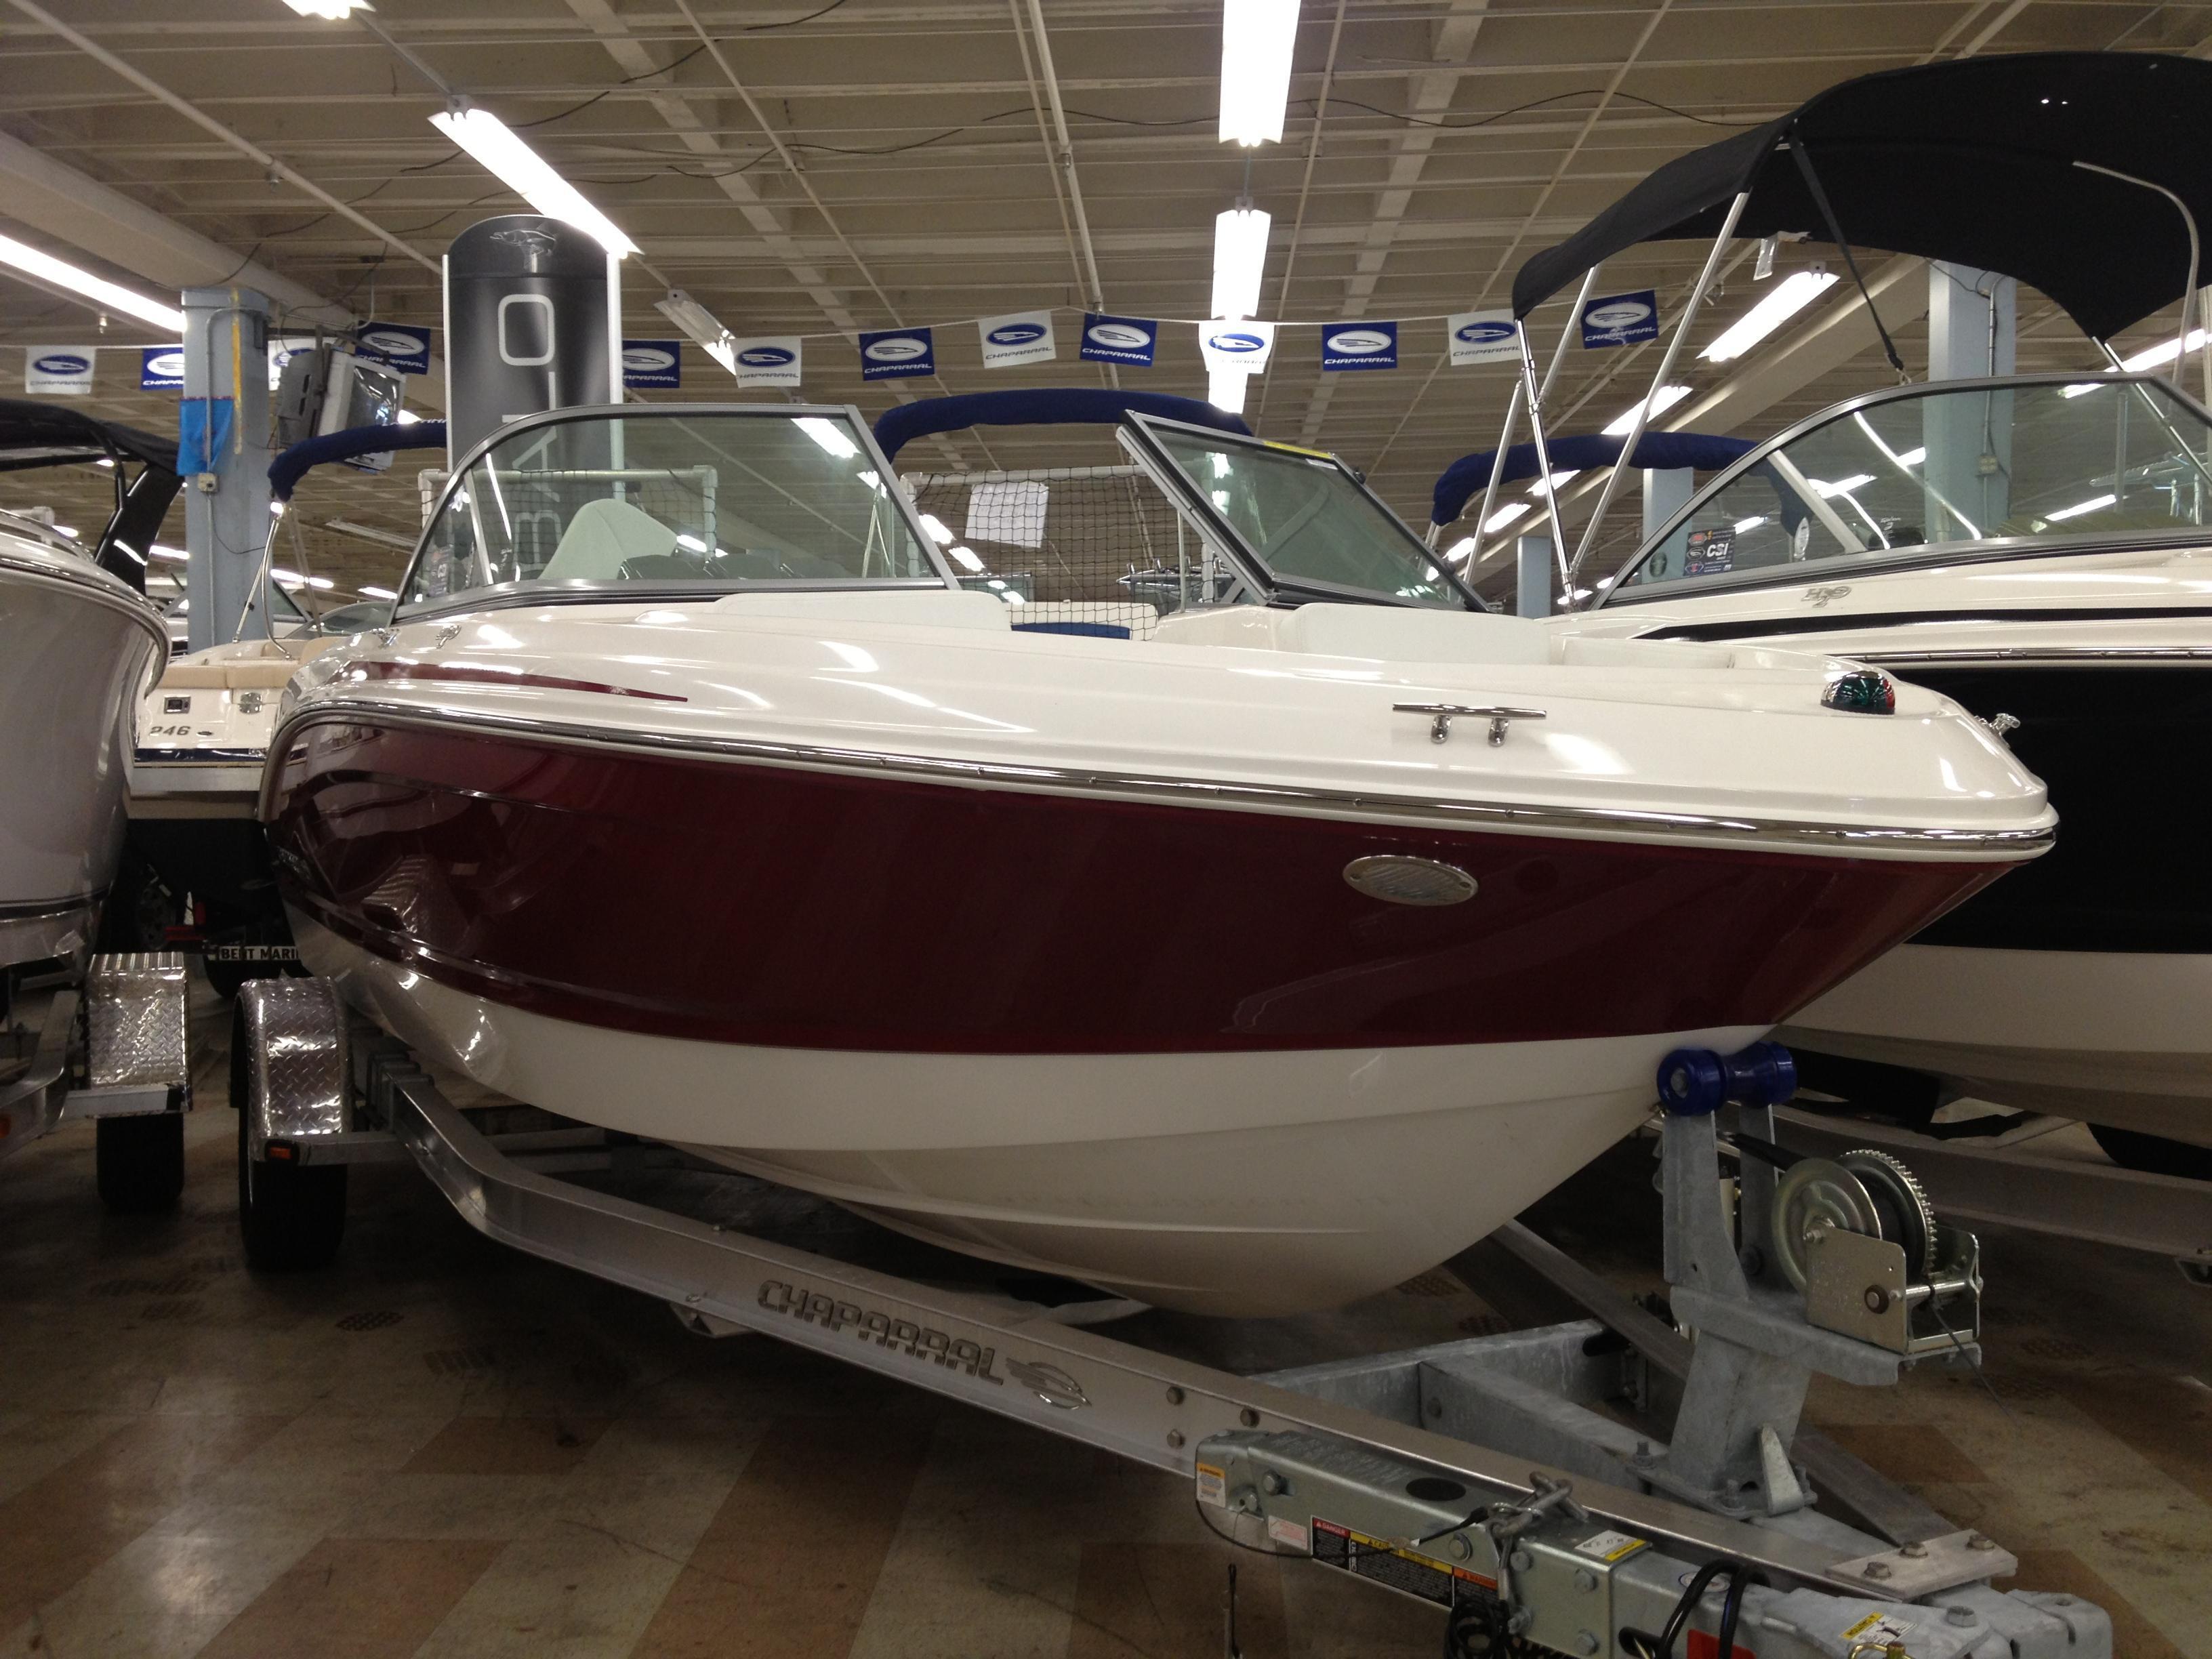 Chaparral 19 Sport H2O, Metairie